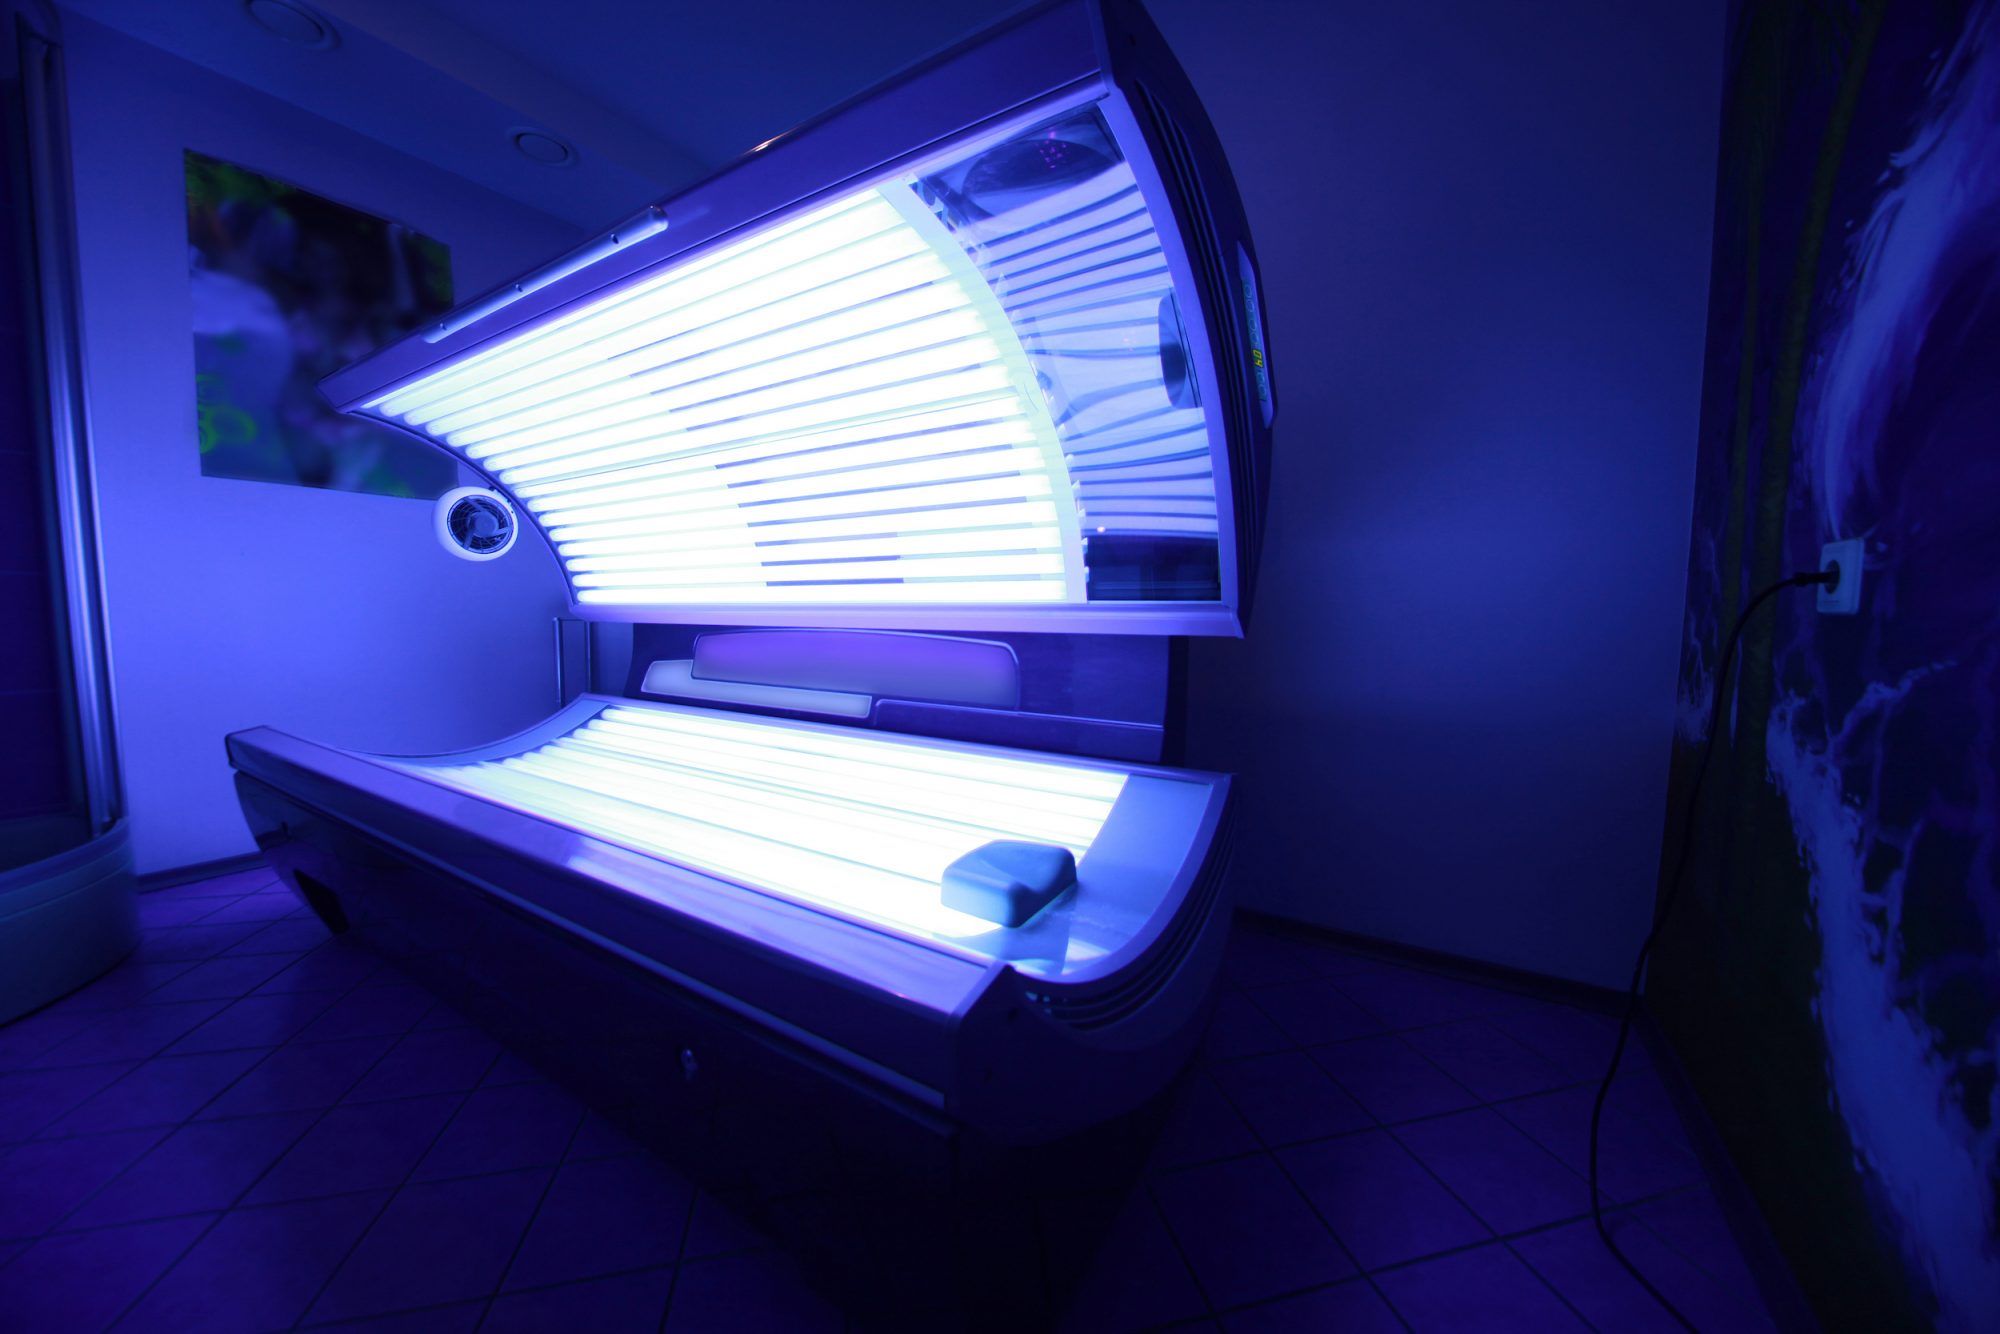 Skin tanning devices are a major cause of skin cancers